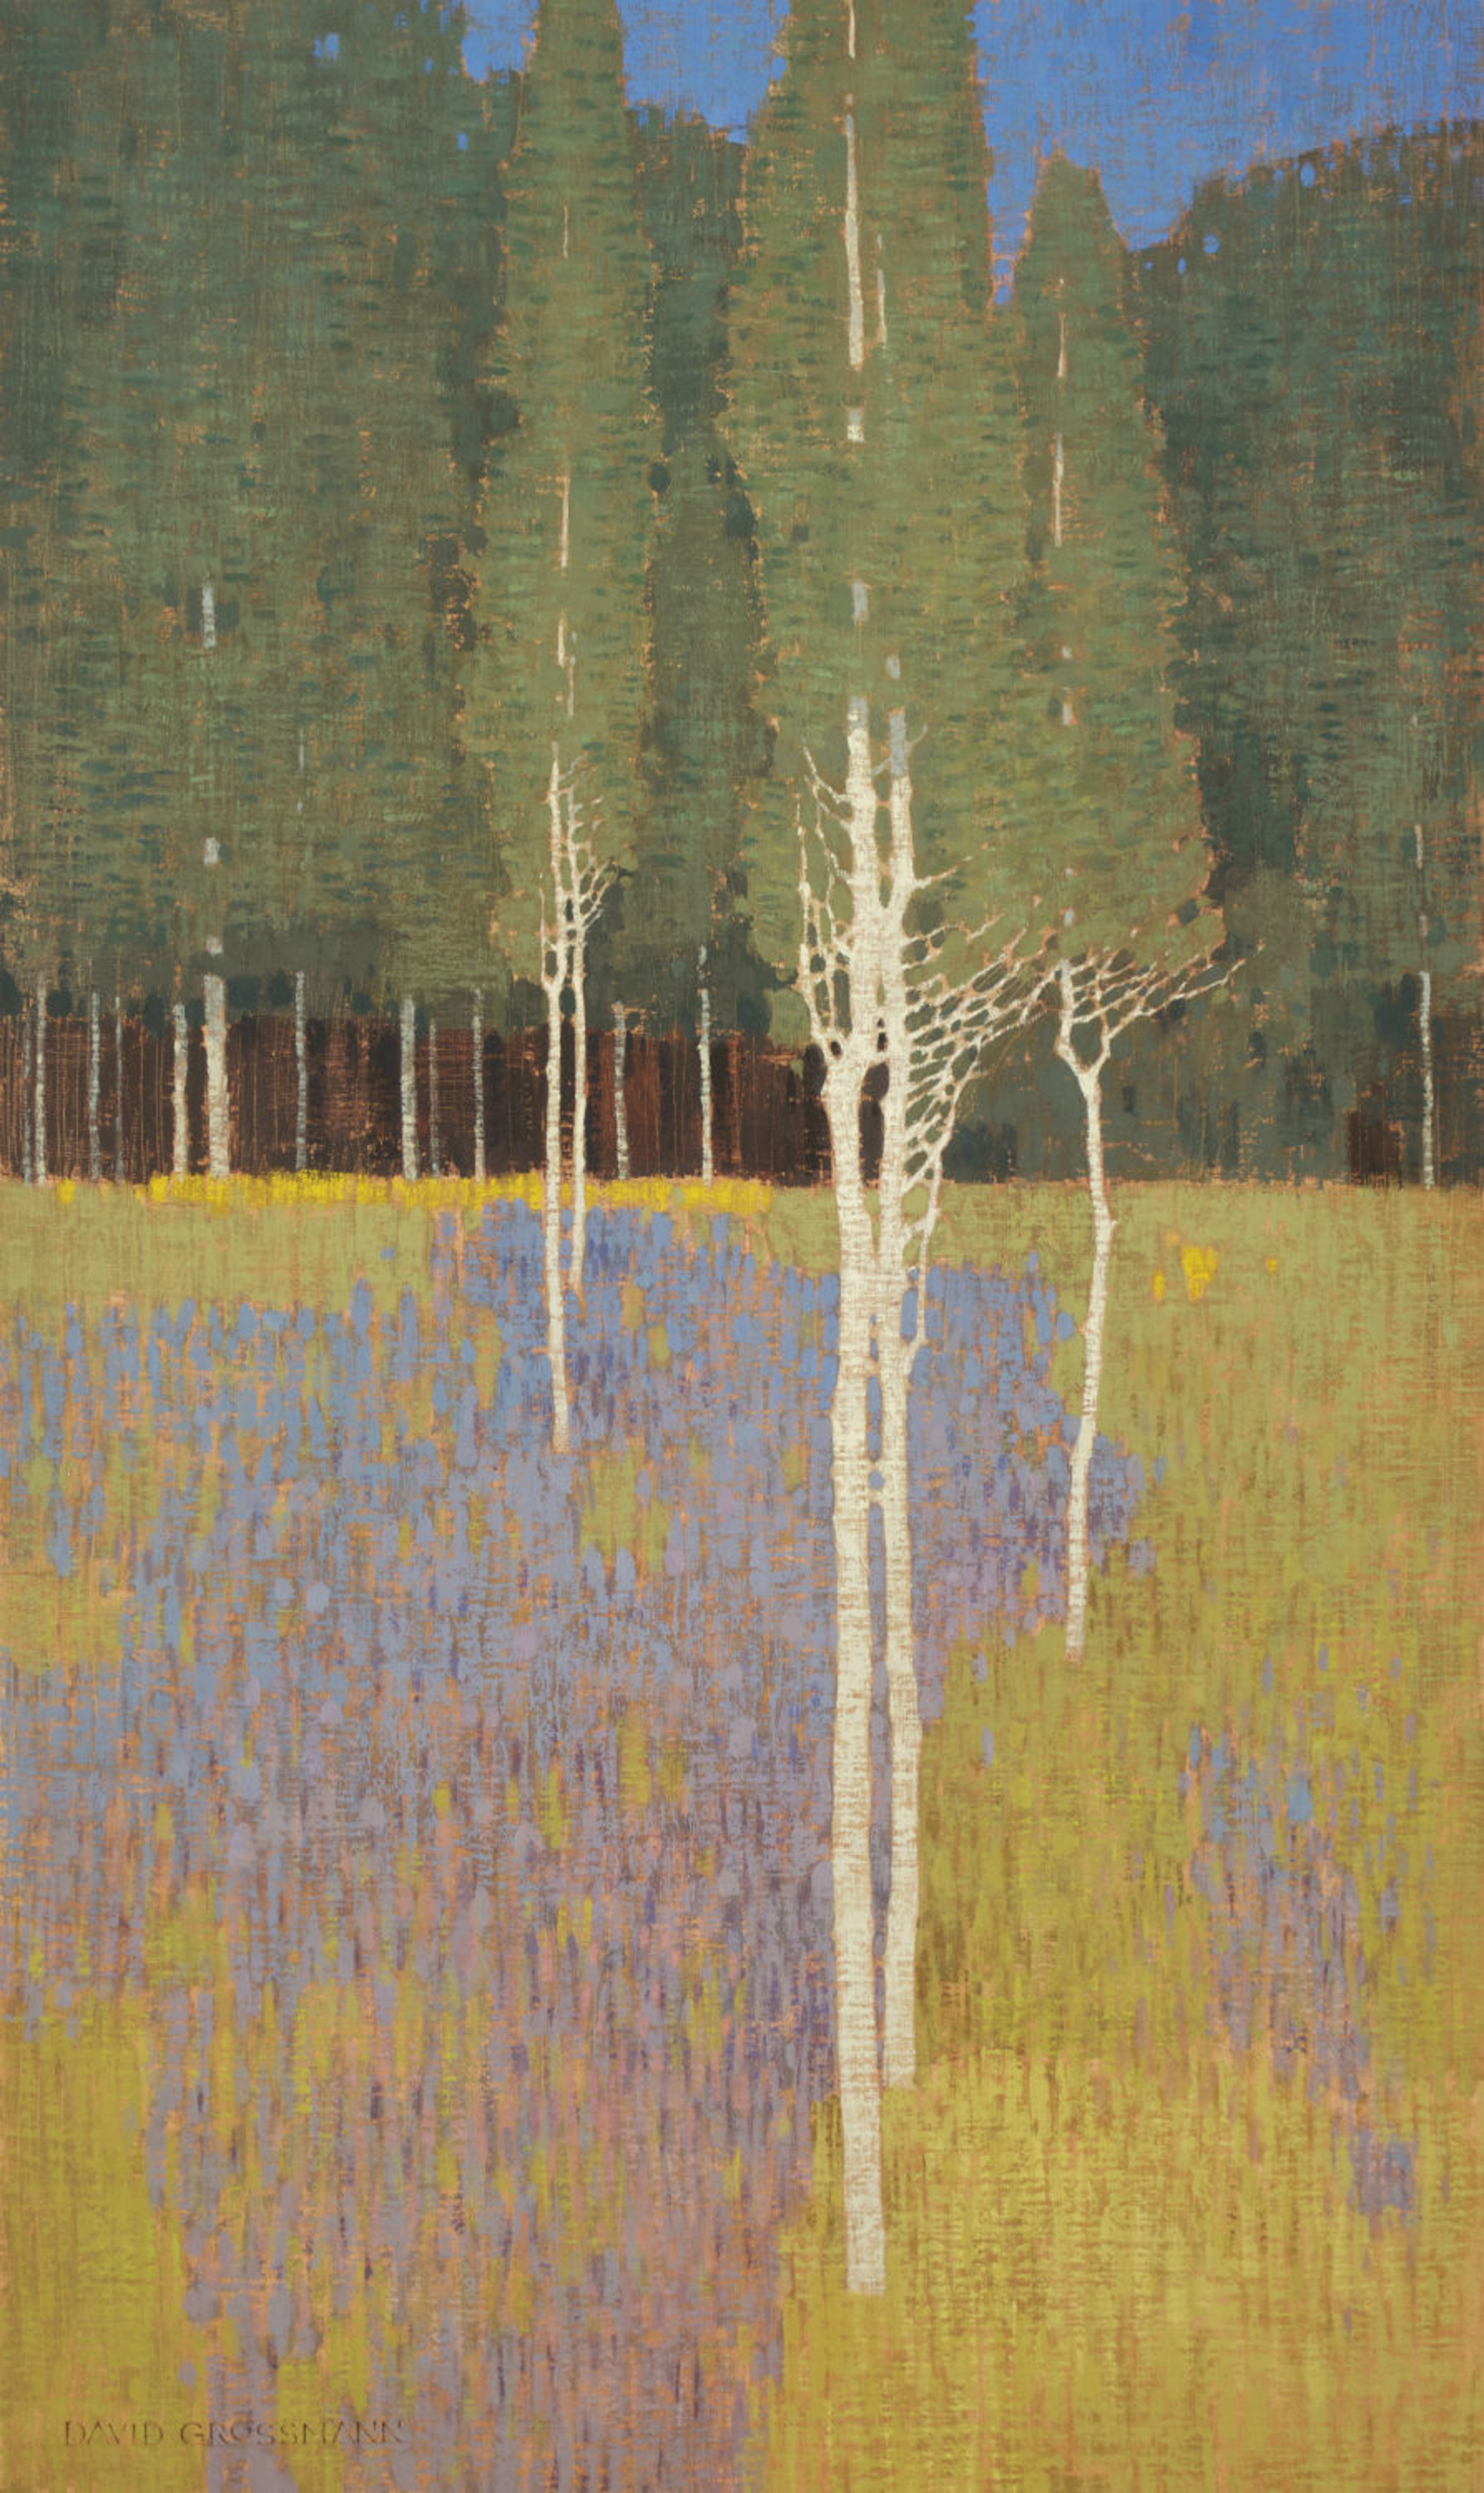 Flower Patterns and Forest Edge Commission by David Grossmann